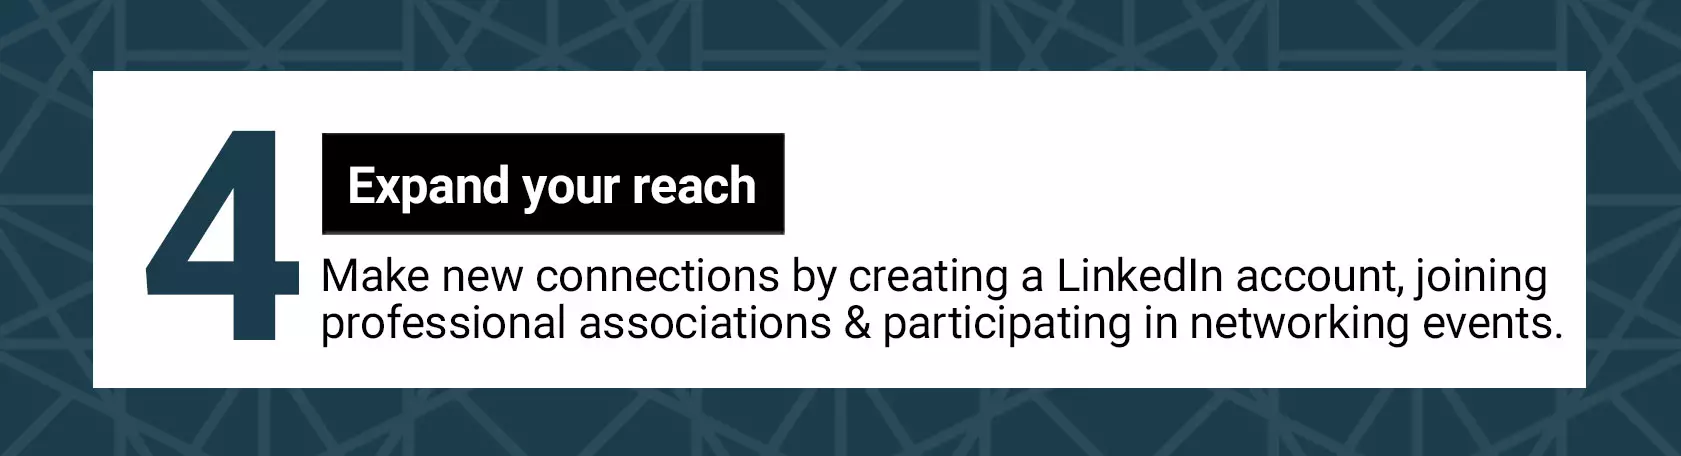 Step 4: Expand your reach with networking sites and events